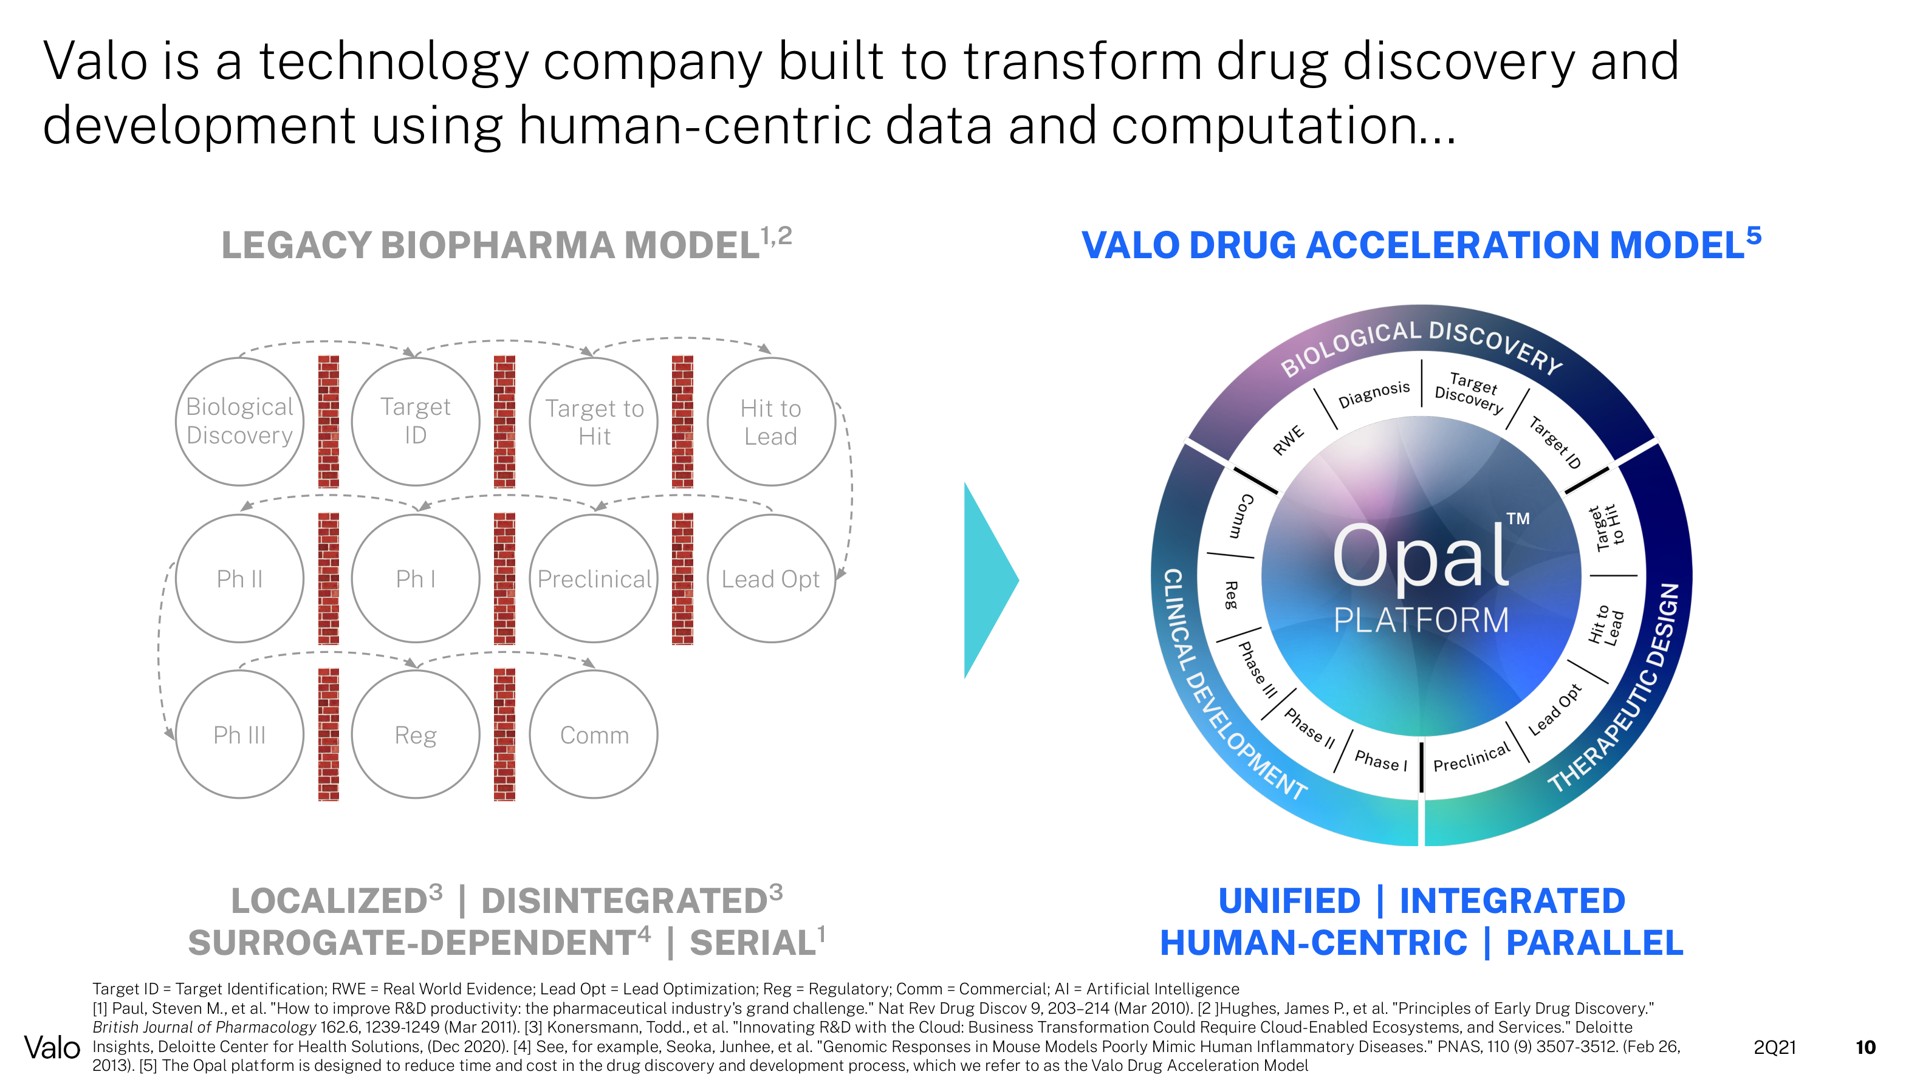 is a technology company built to transform drug discovery and development using human centric data and computation | Valo